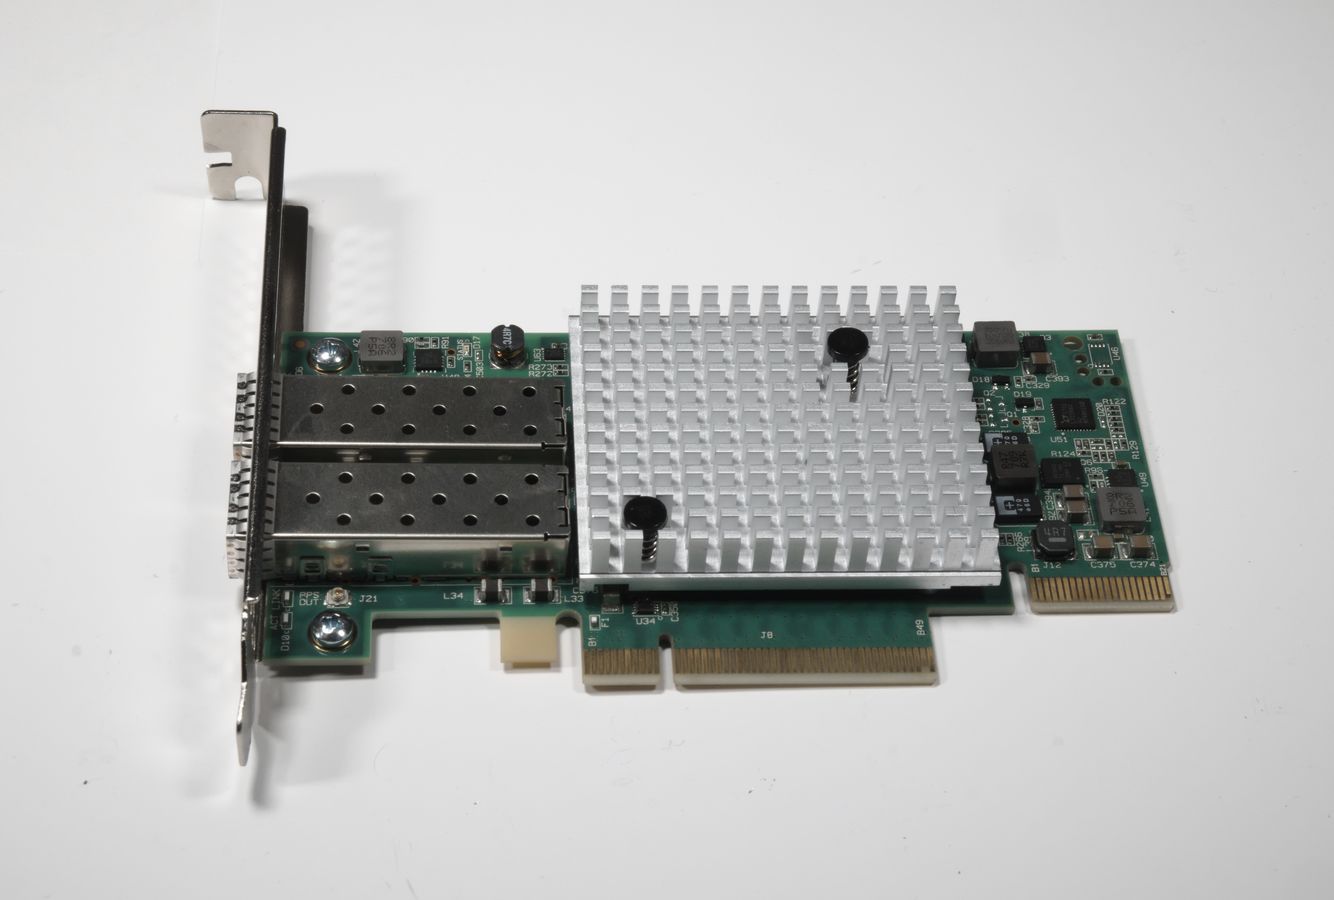 A standard PCIe card with two SFP+ cages on the left by the bracket, and a low-profile aluminium heatsink in the middle, attached with push-pins. The card is quite long because of the voltage regulator circuitry on the right.